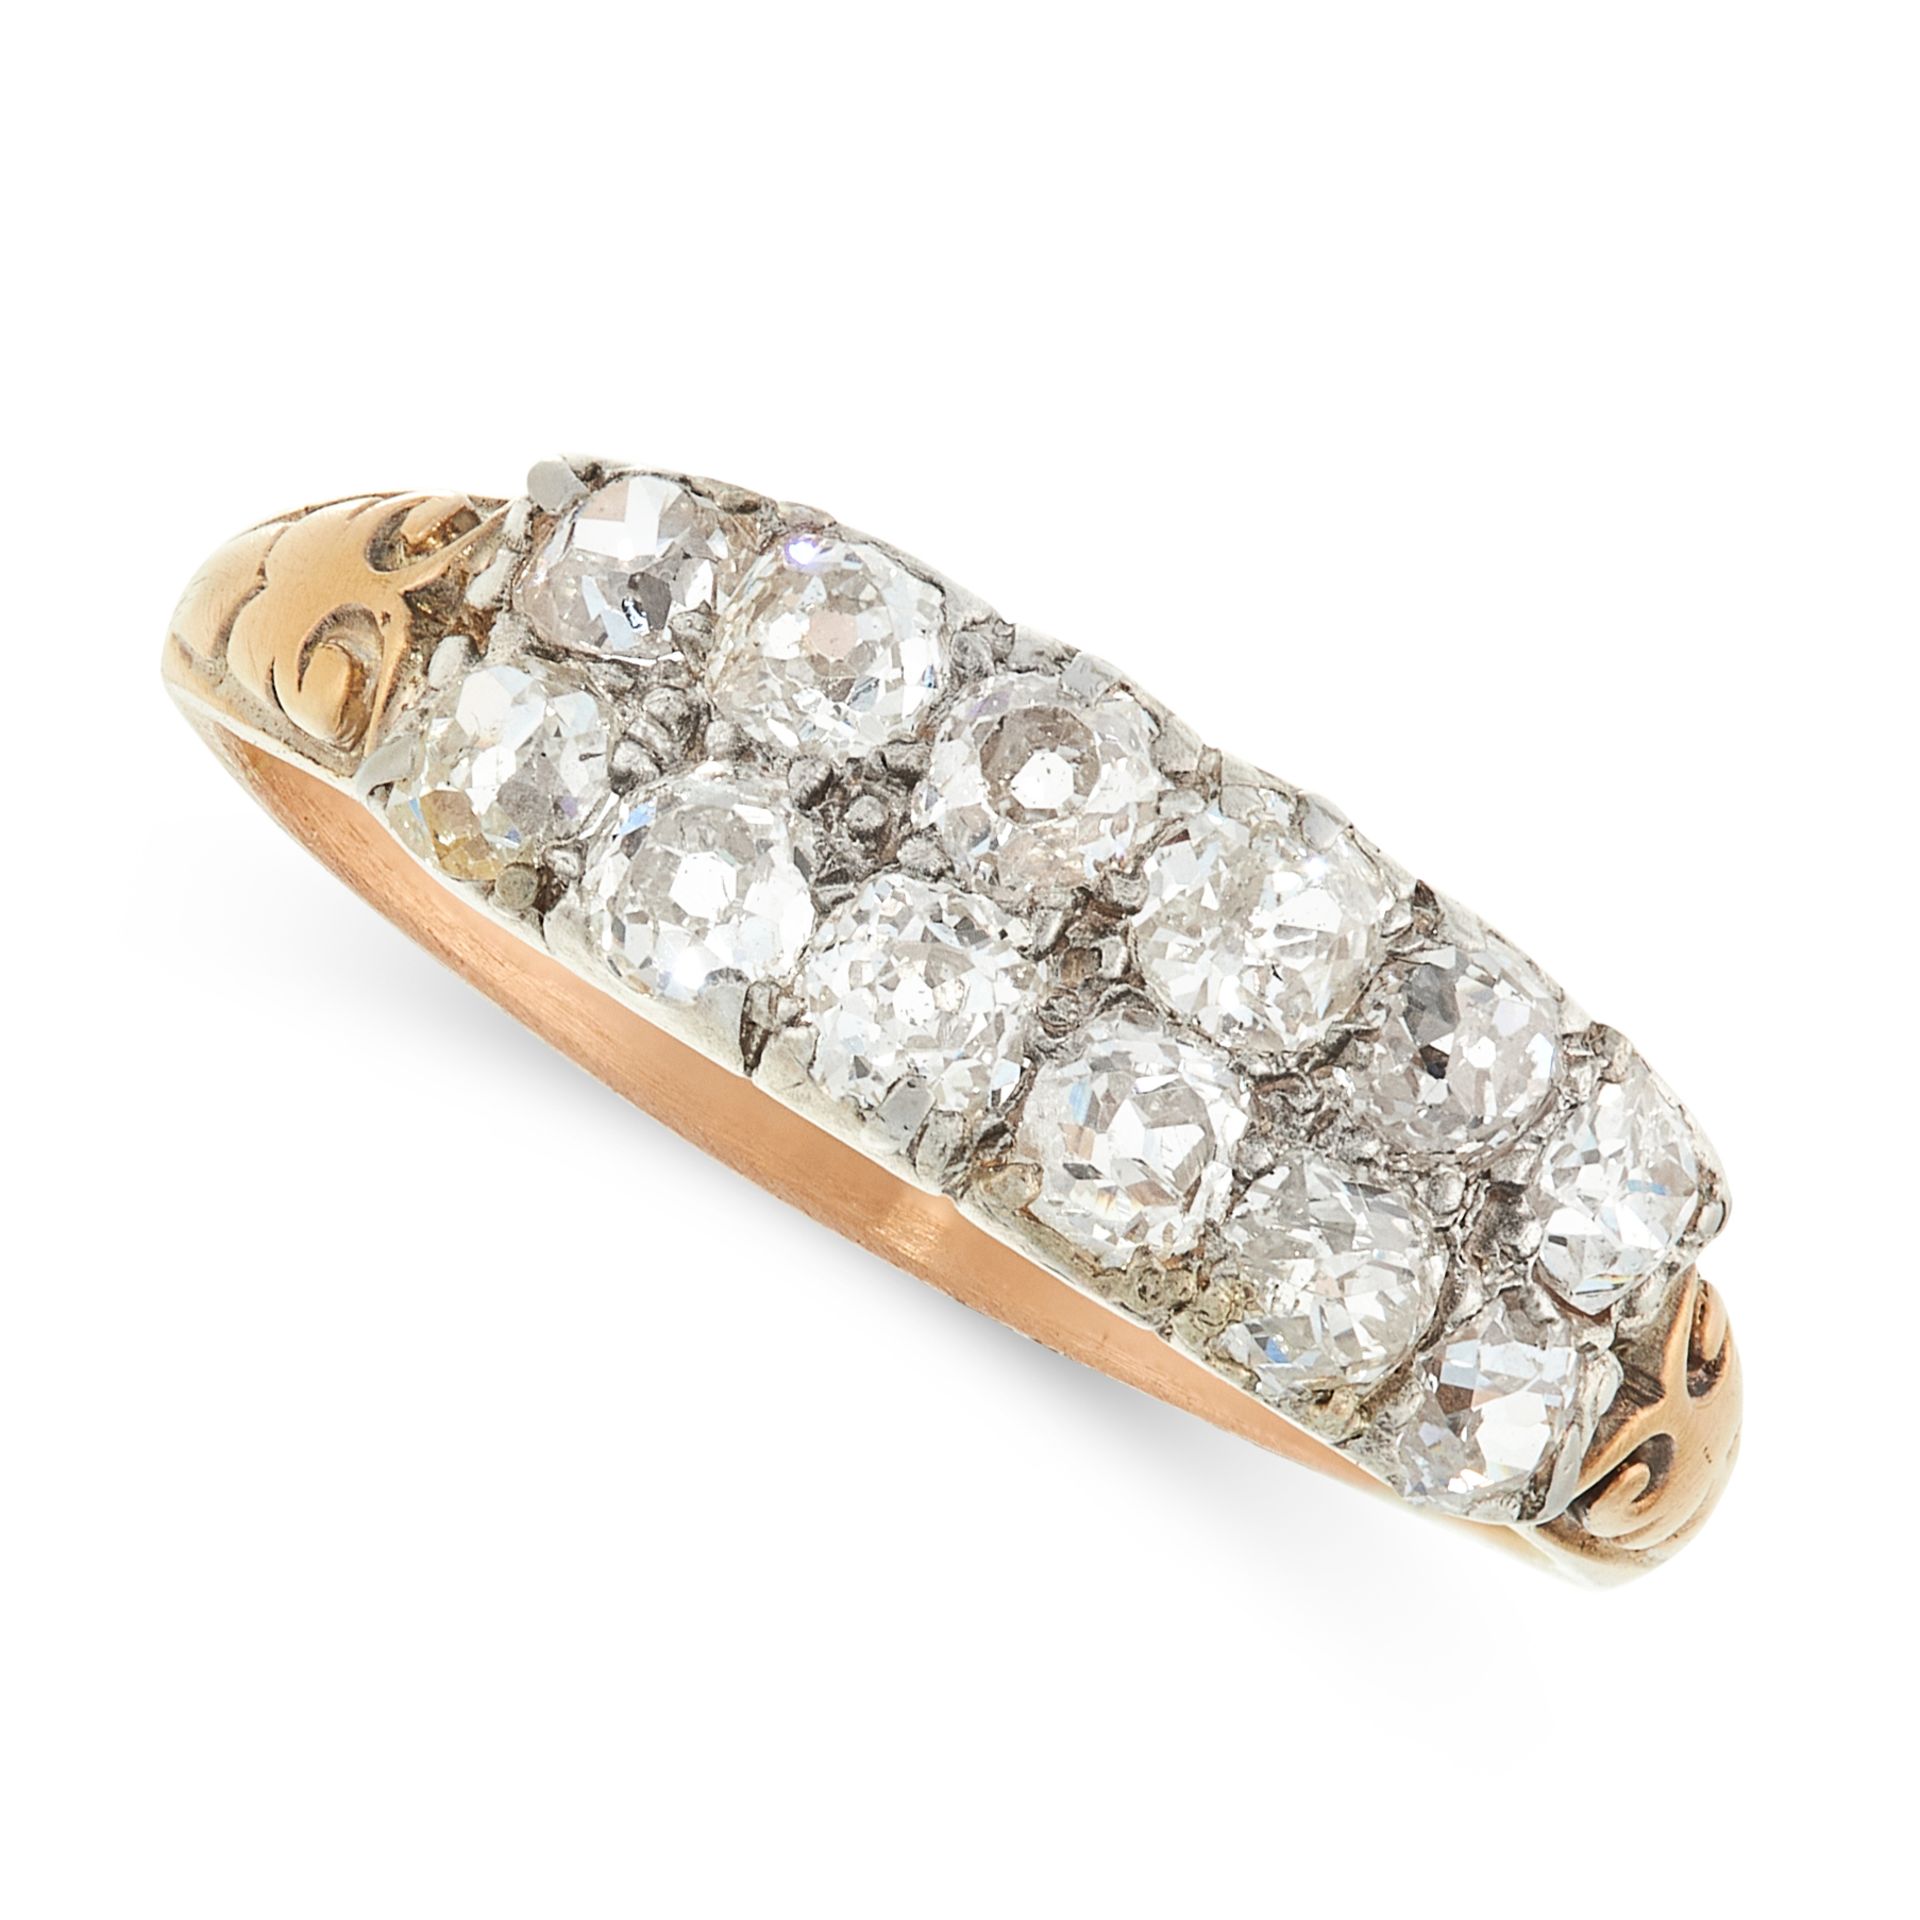 AN ANTIQUE DIAMOND DRESS RING, 19TH CENTURY in yellow gold and silver, set with two rows of old